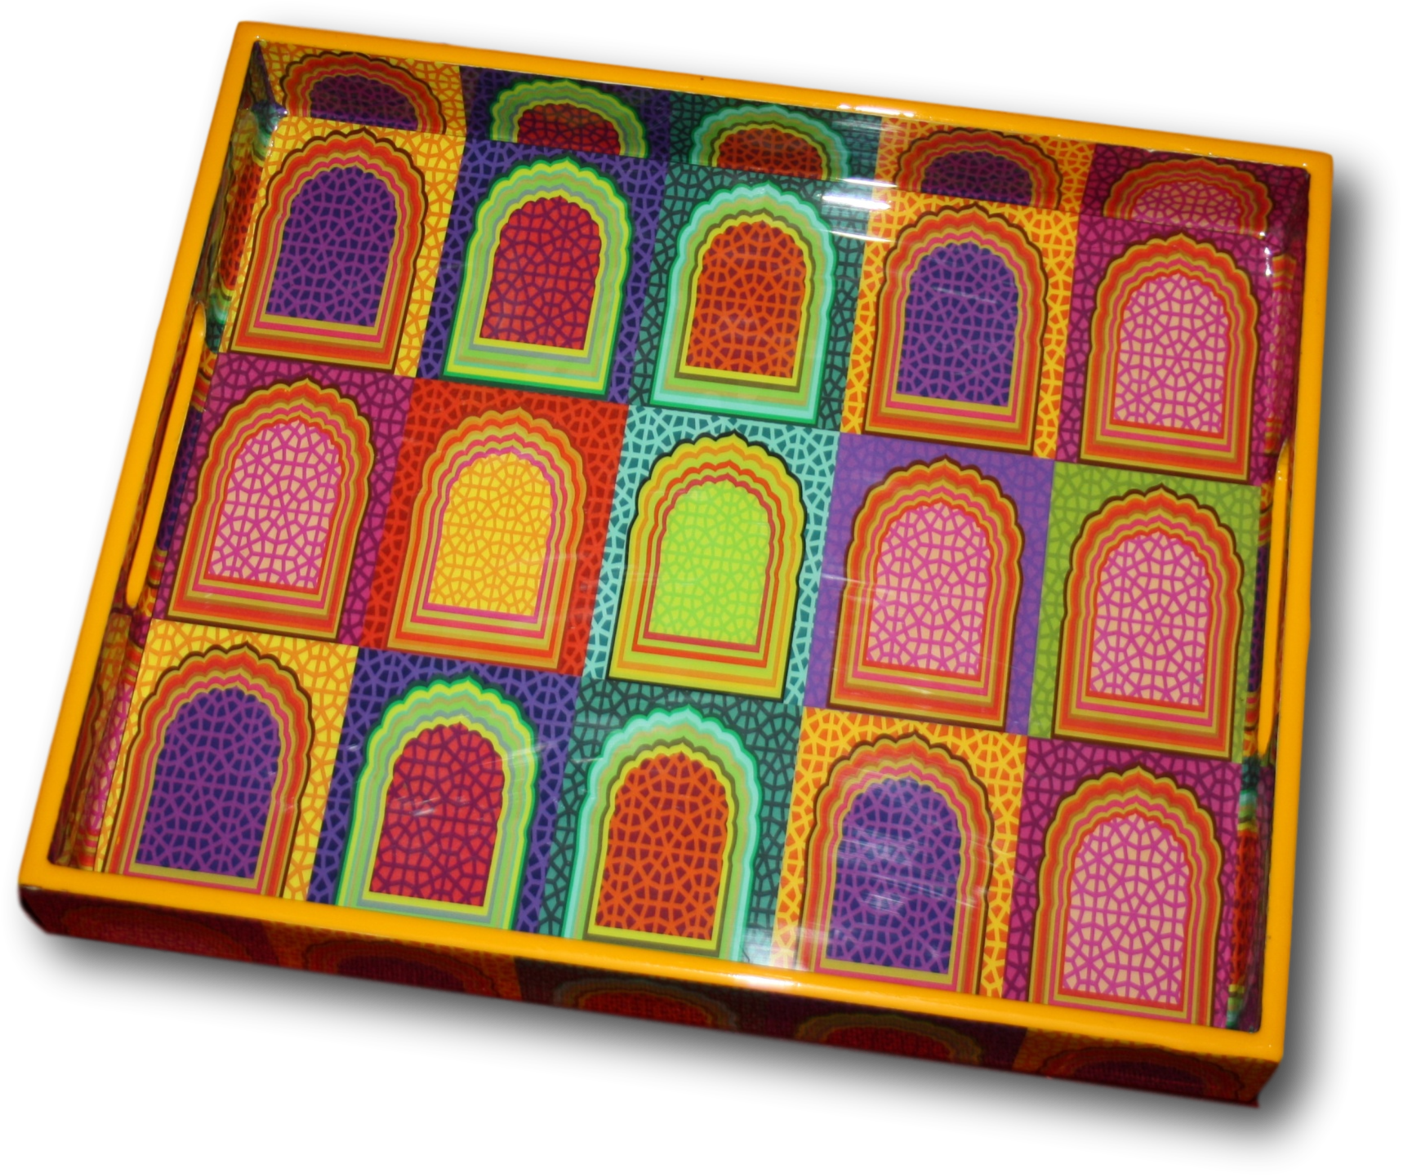 A Tray With Colorful Designs